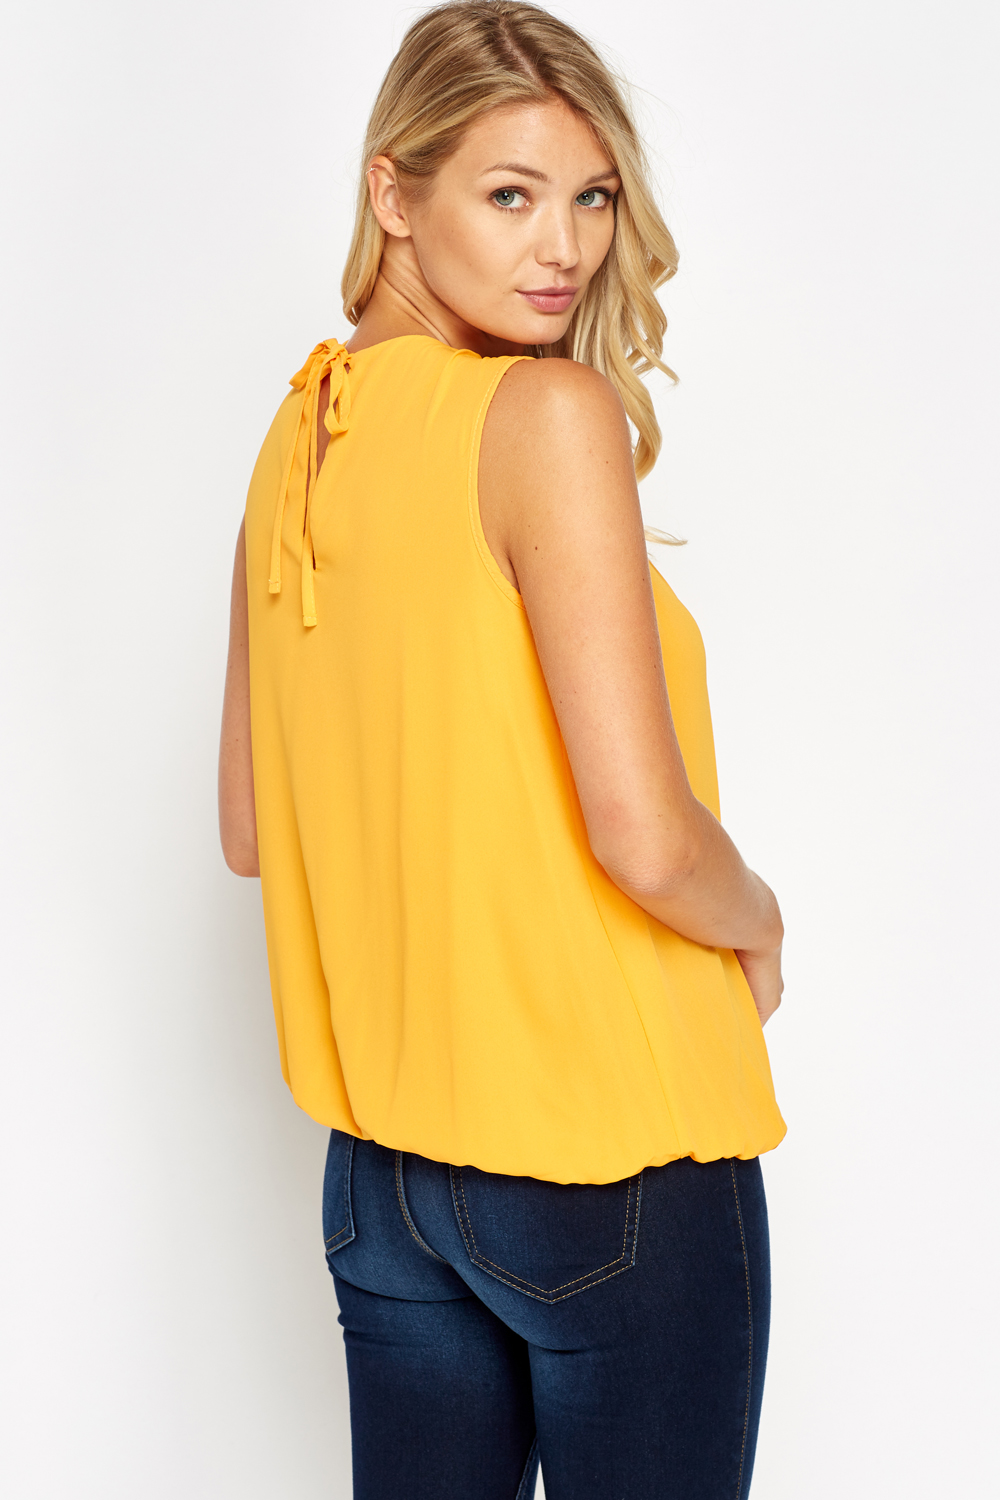 Jeweled Neck Sunflower Top - Just £5